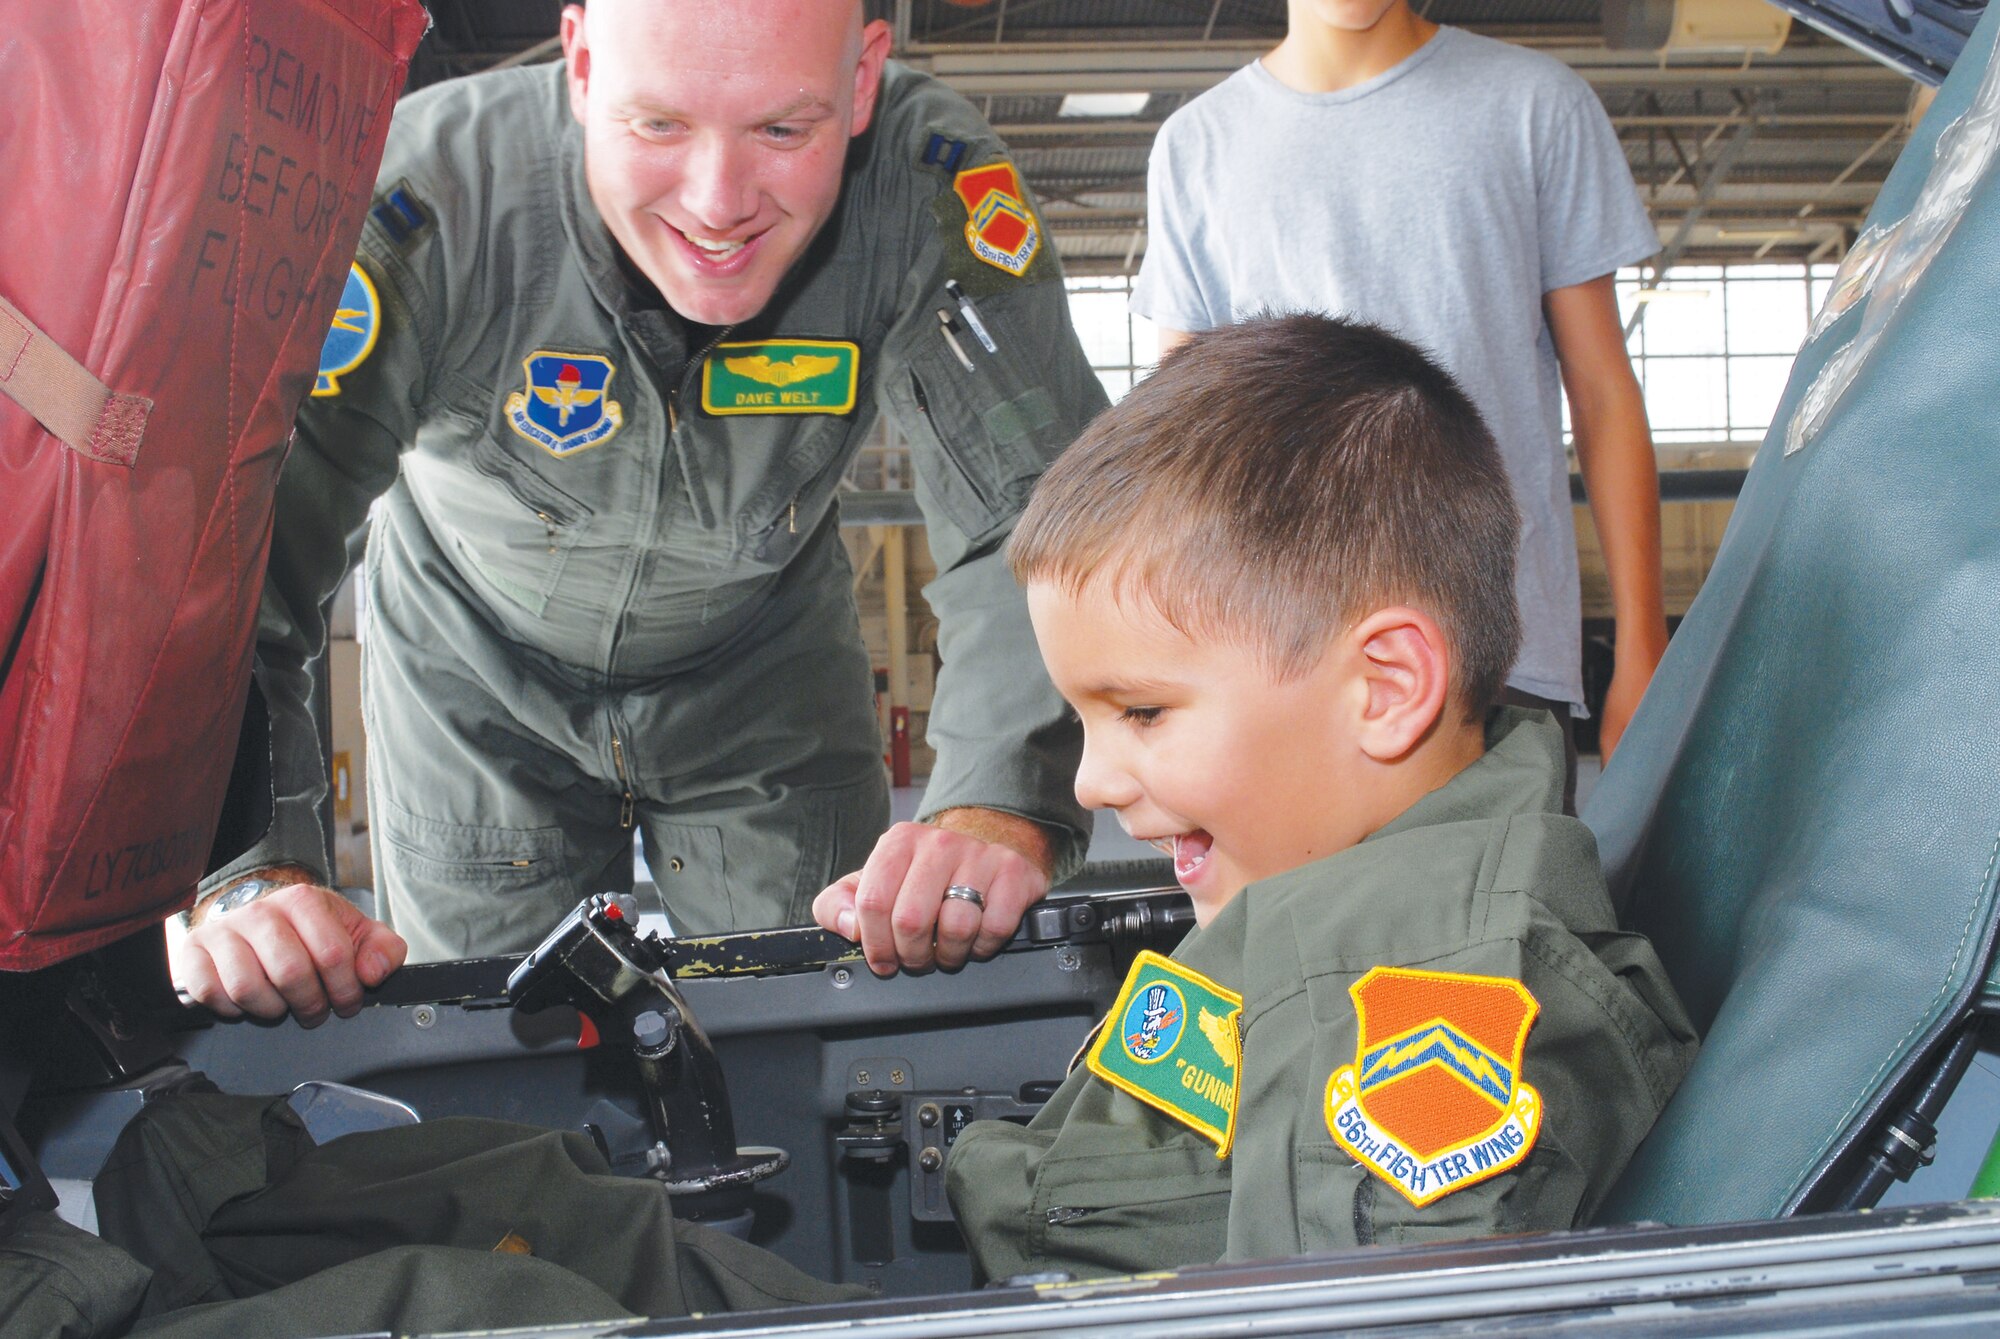 Pilot-for-a-day Trevor "Gunner" Collins, 5, shows his  excitement while sitting in the cockpit of an F-16 Fighting Falcon assigned to the 310th Fighter Squadron, 56th Fighter Wing on July 29th in Hangar 913 during his tour of Luke Air Force Base, Arizona.  (U.S. Air Force photo/Senior Airman Tracie Forte)